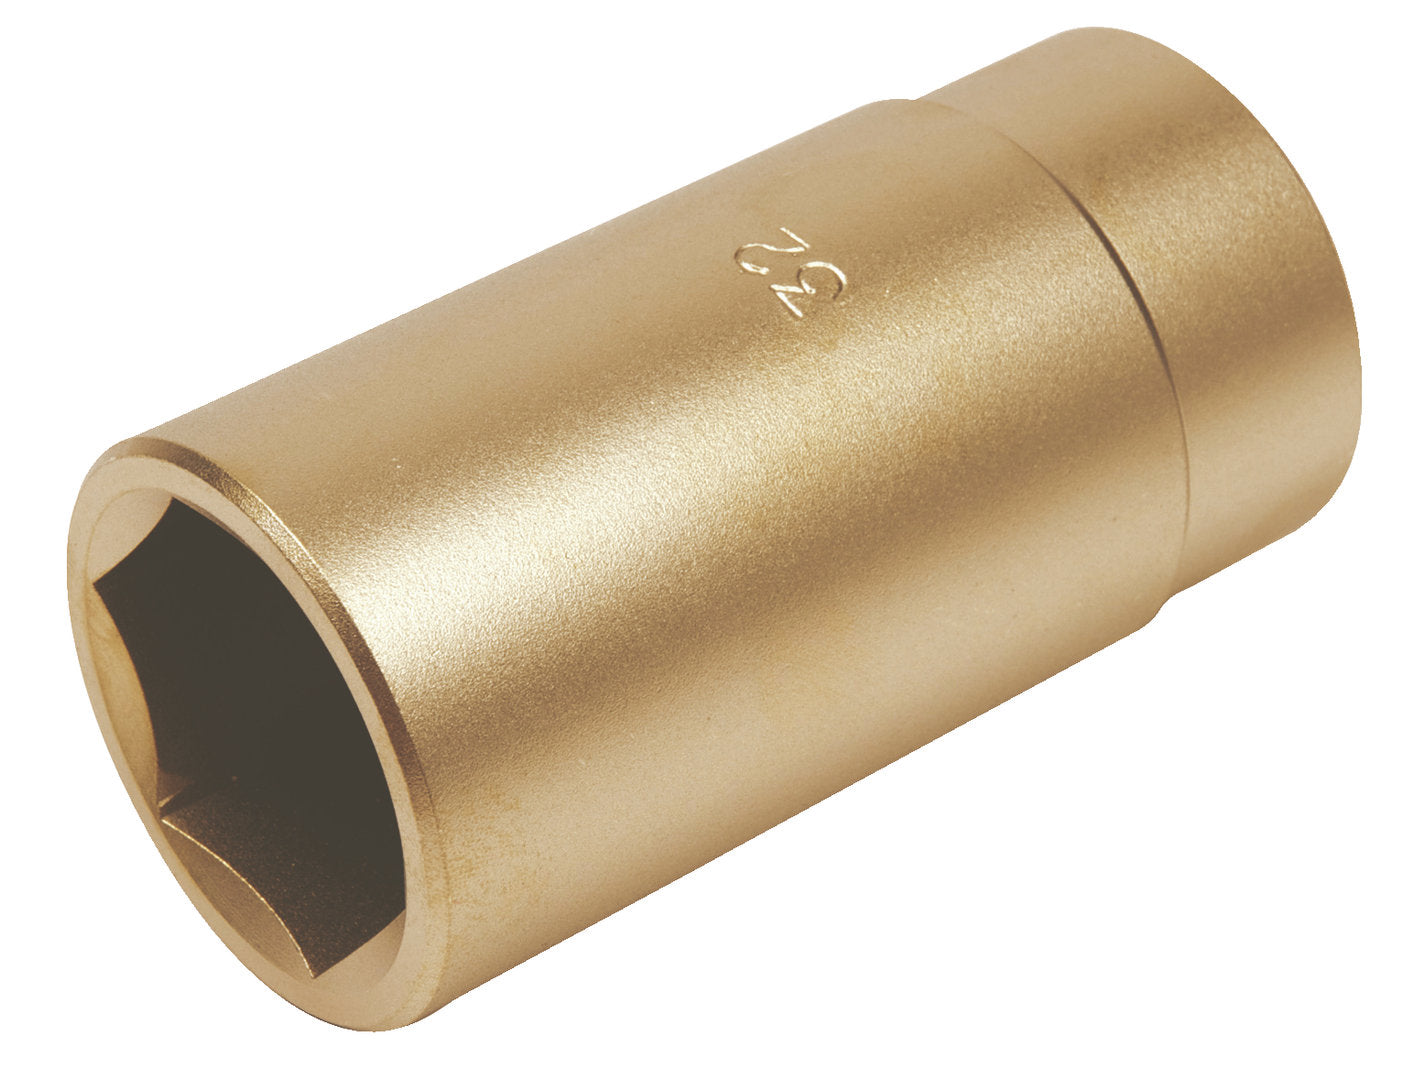 GEDORE GED0350010S - 1/2" hex socket, length 21mm (2523892)